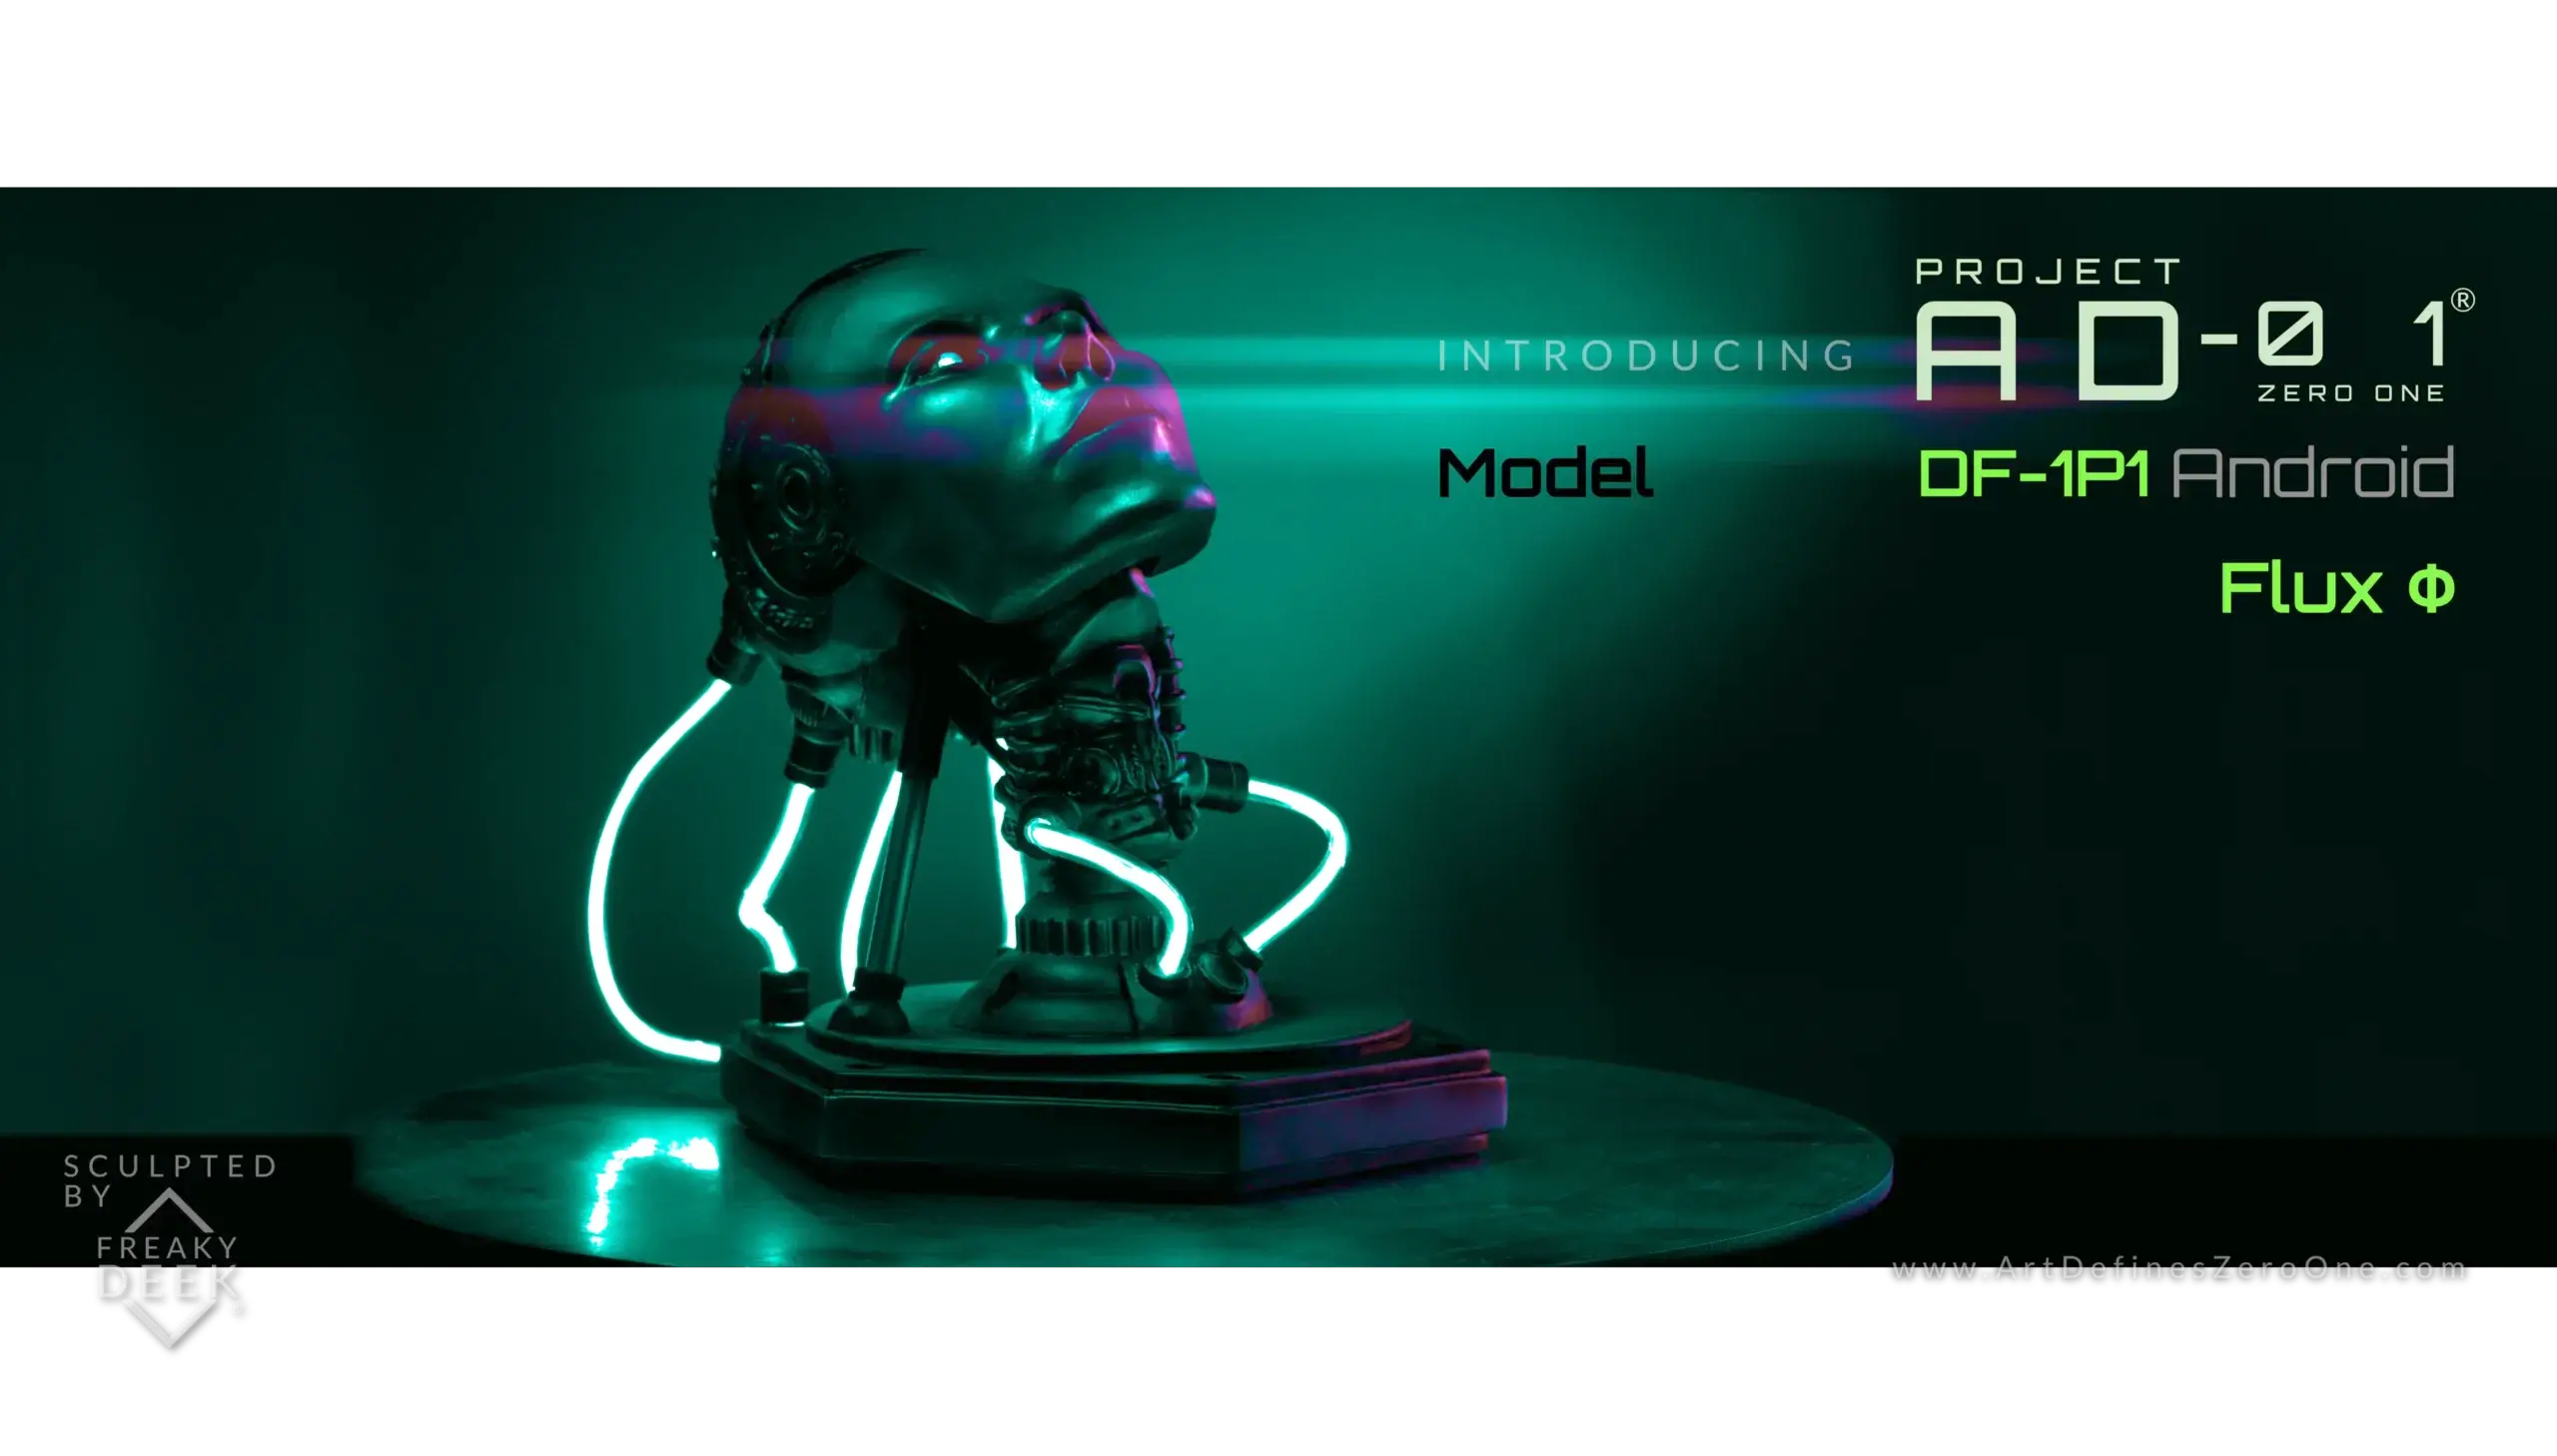 Project AD-01 handmade android sculpture Flux with green LED light front view